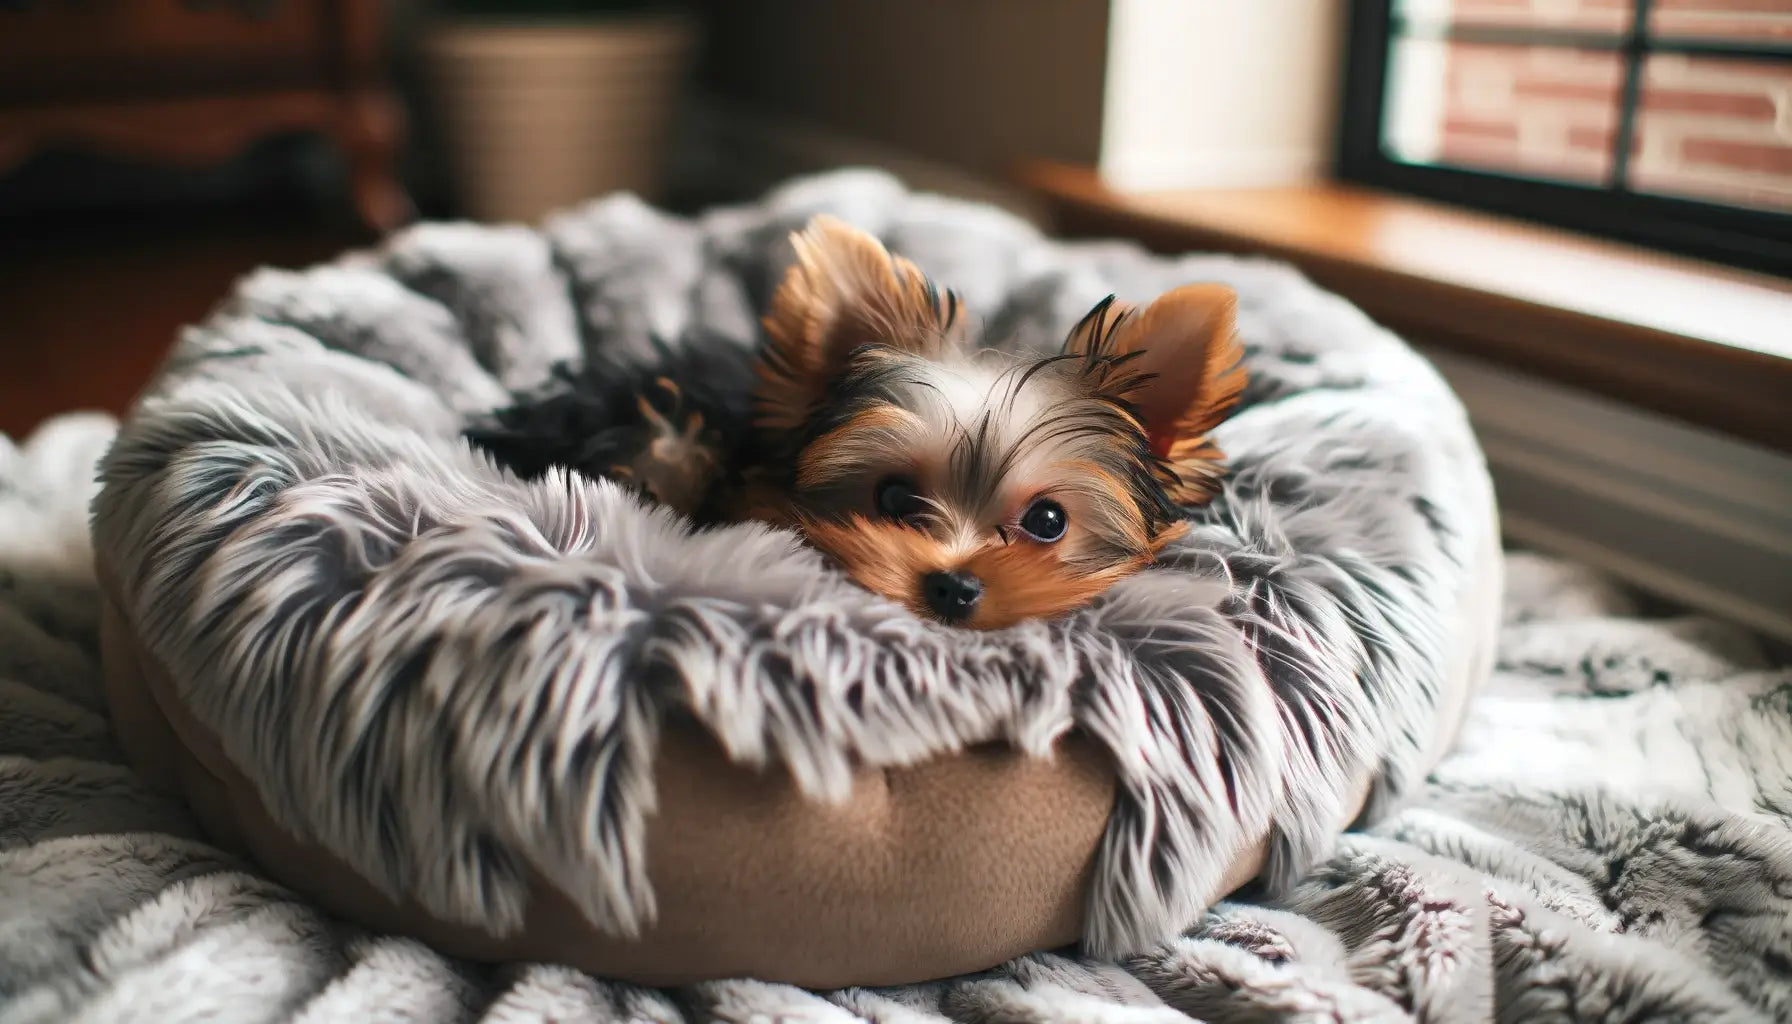 A Teacup Yorkie embodies comfort and relaxation.